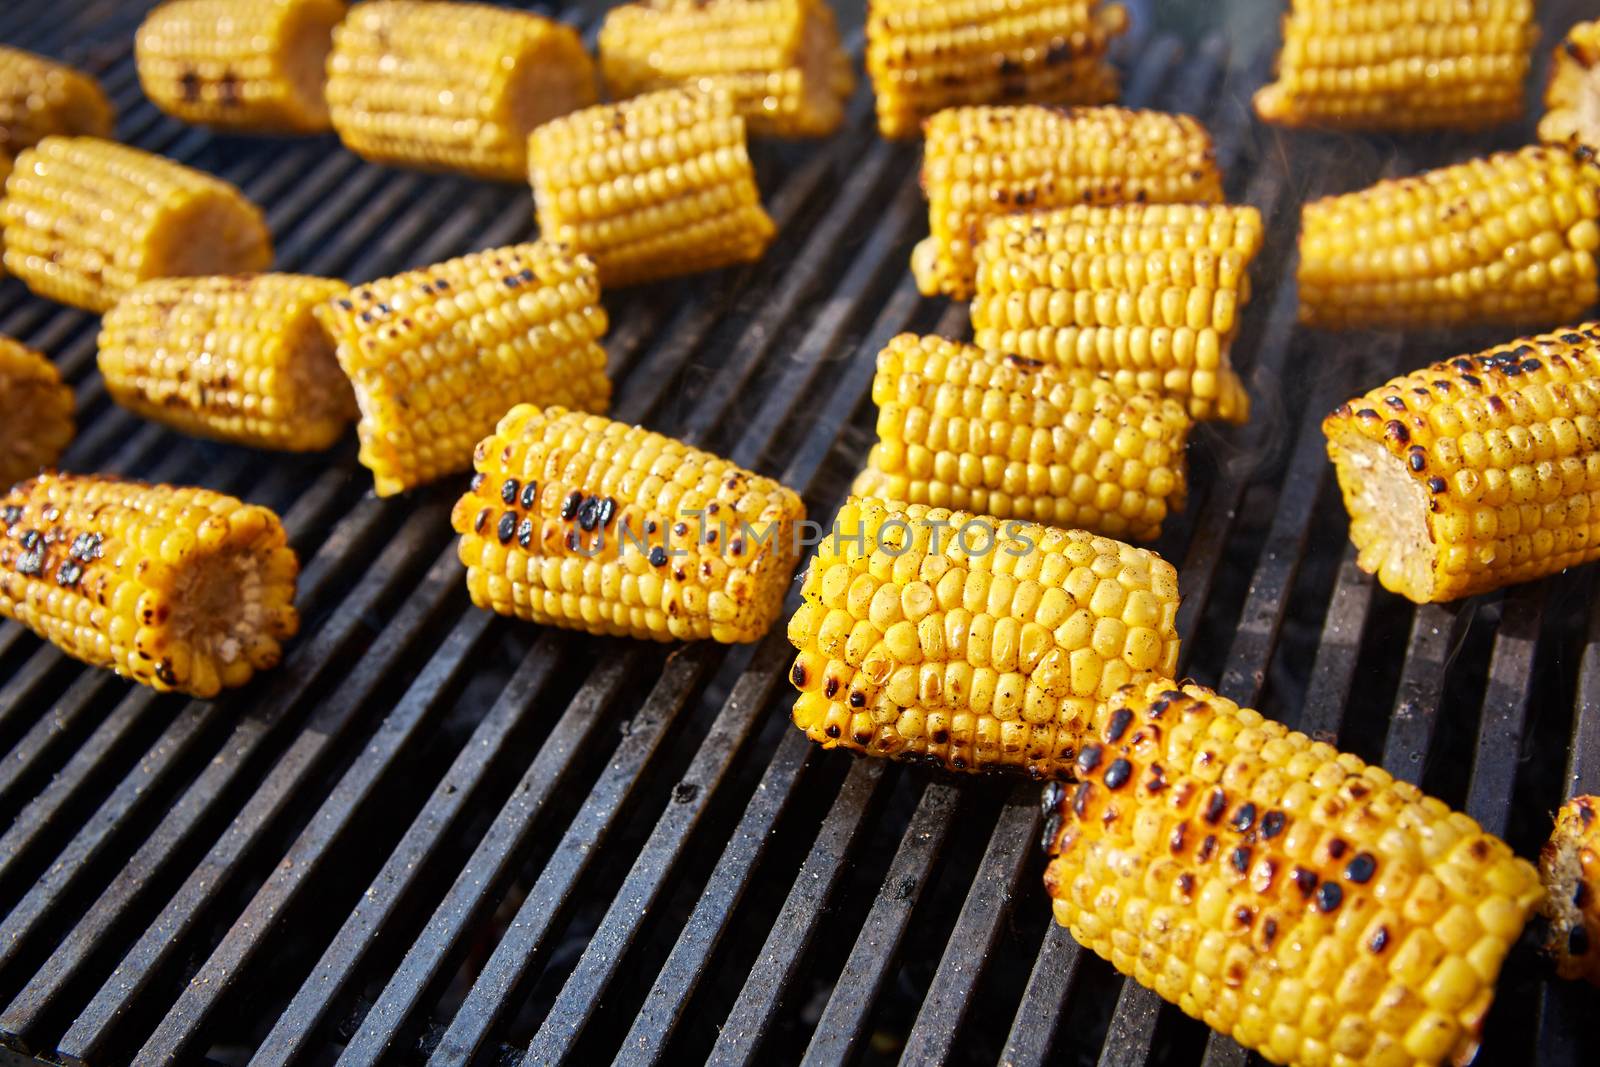 Organic Grilled Corn on the Cob Ready to Eat